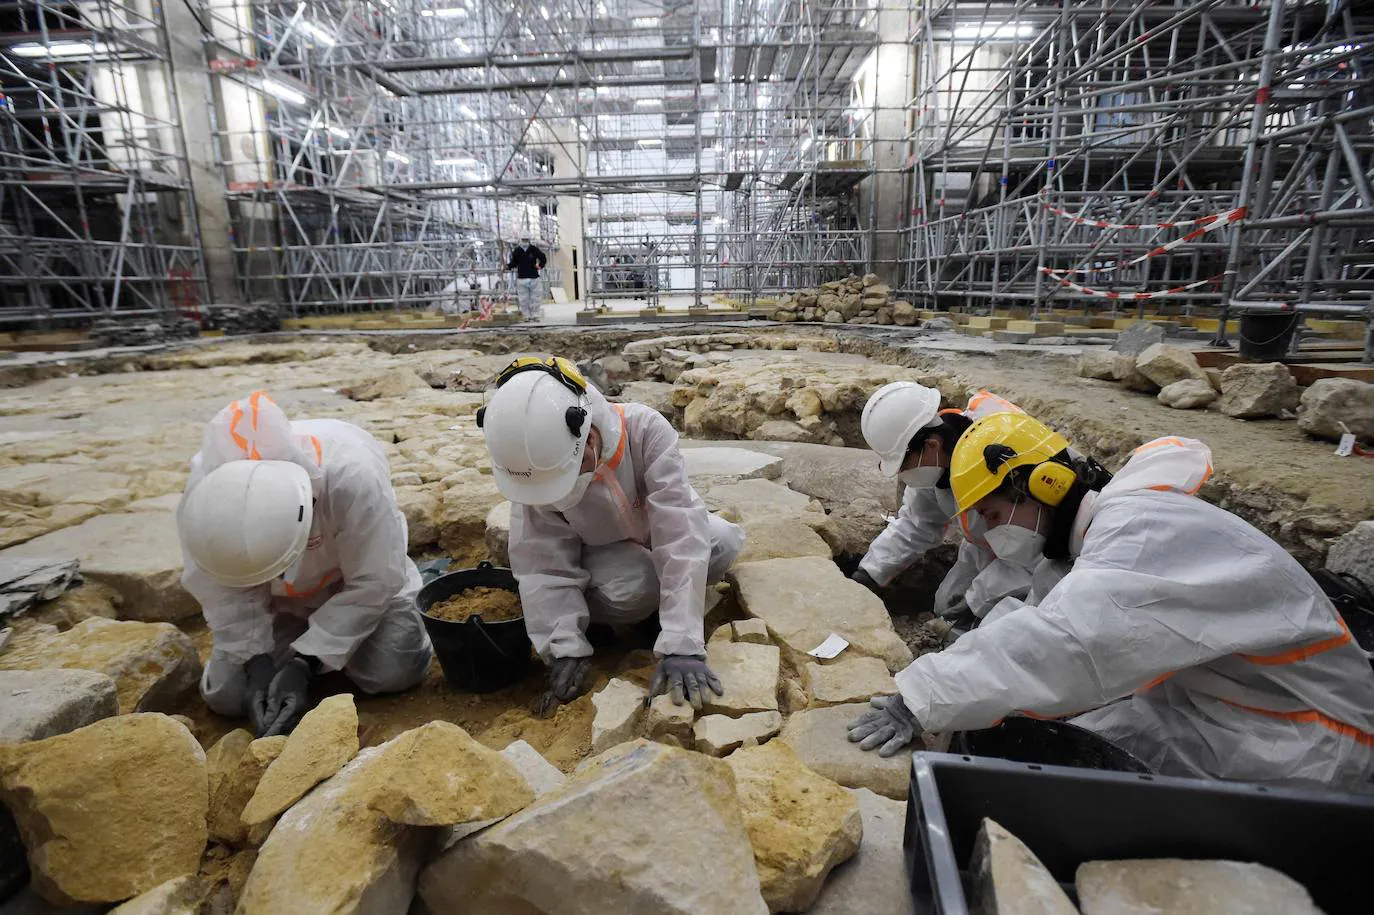 They find under Notre-Dame burials and remains of the primitive cathedral